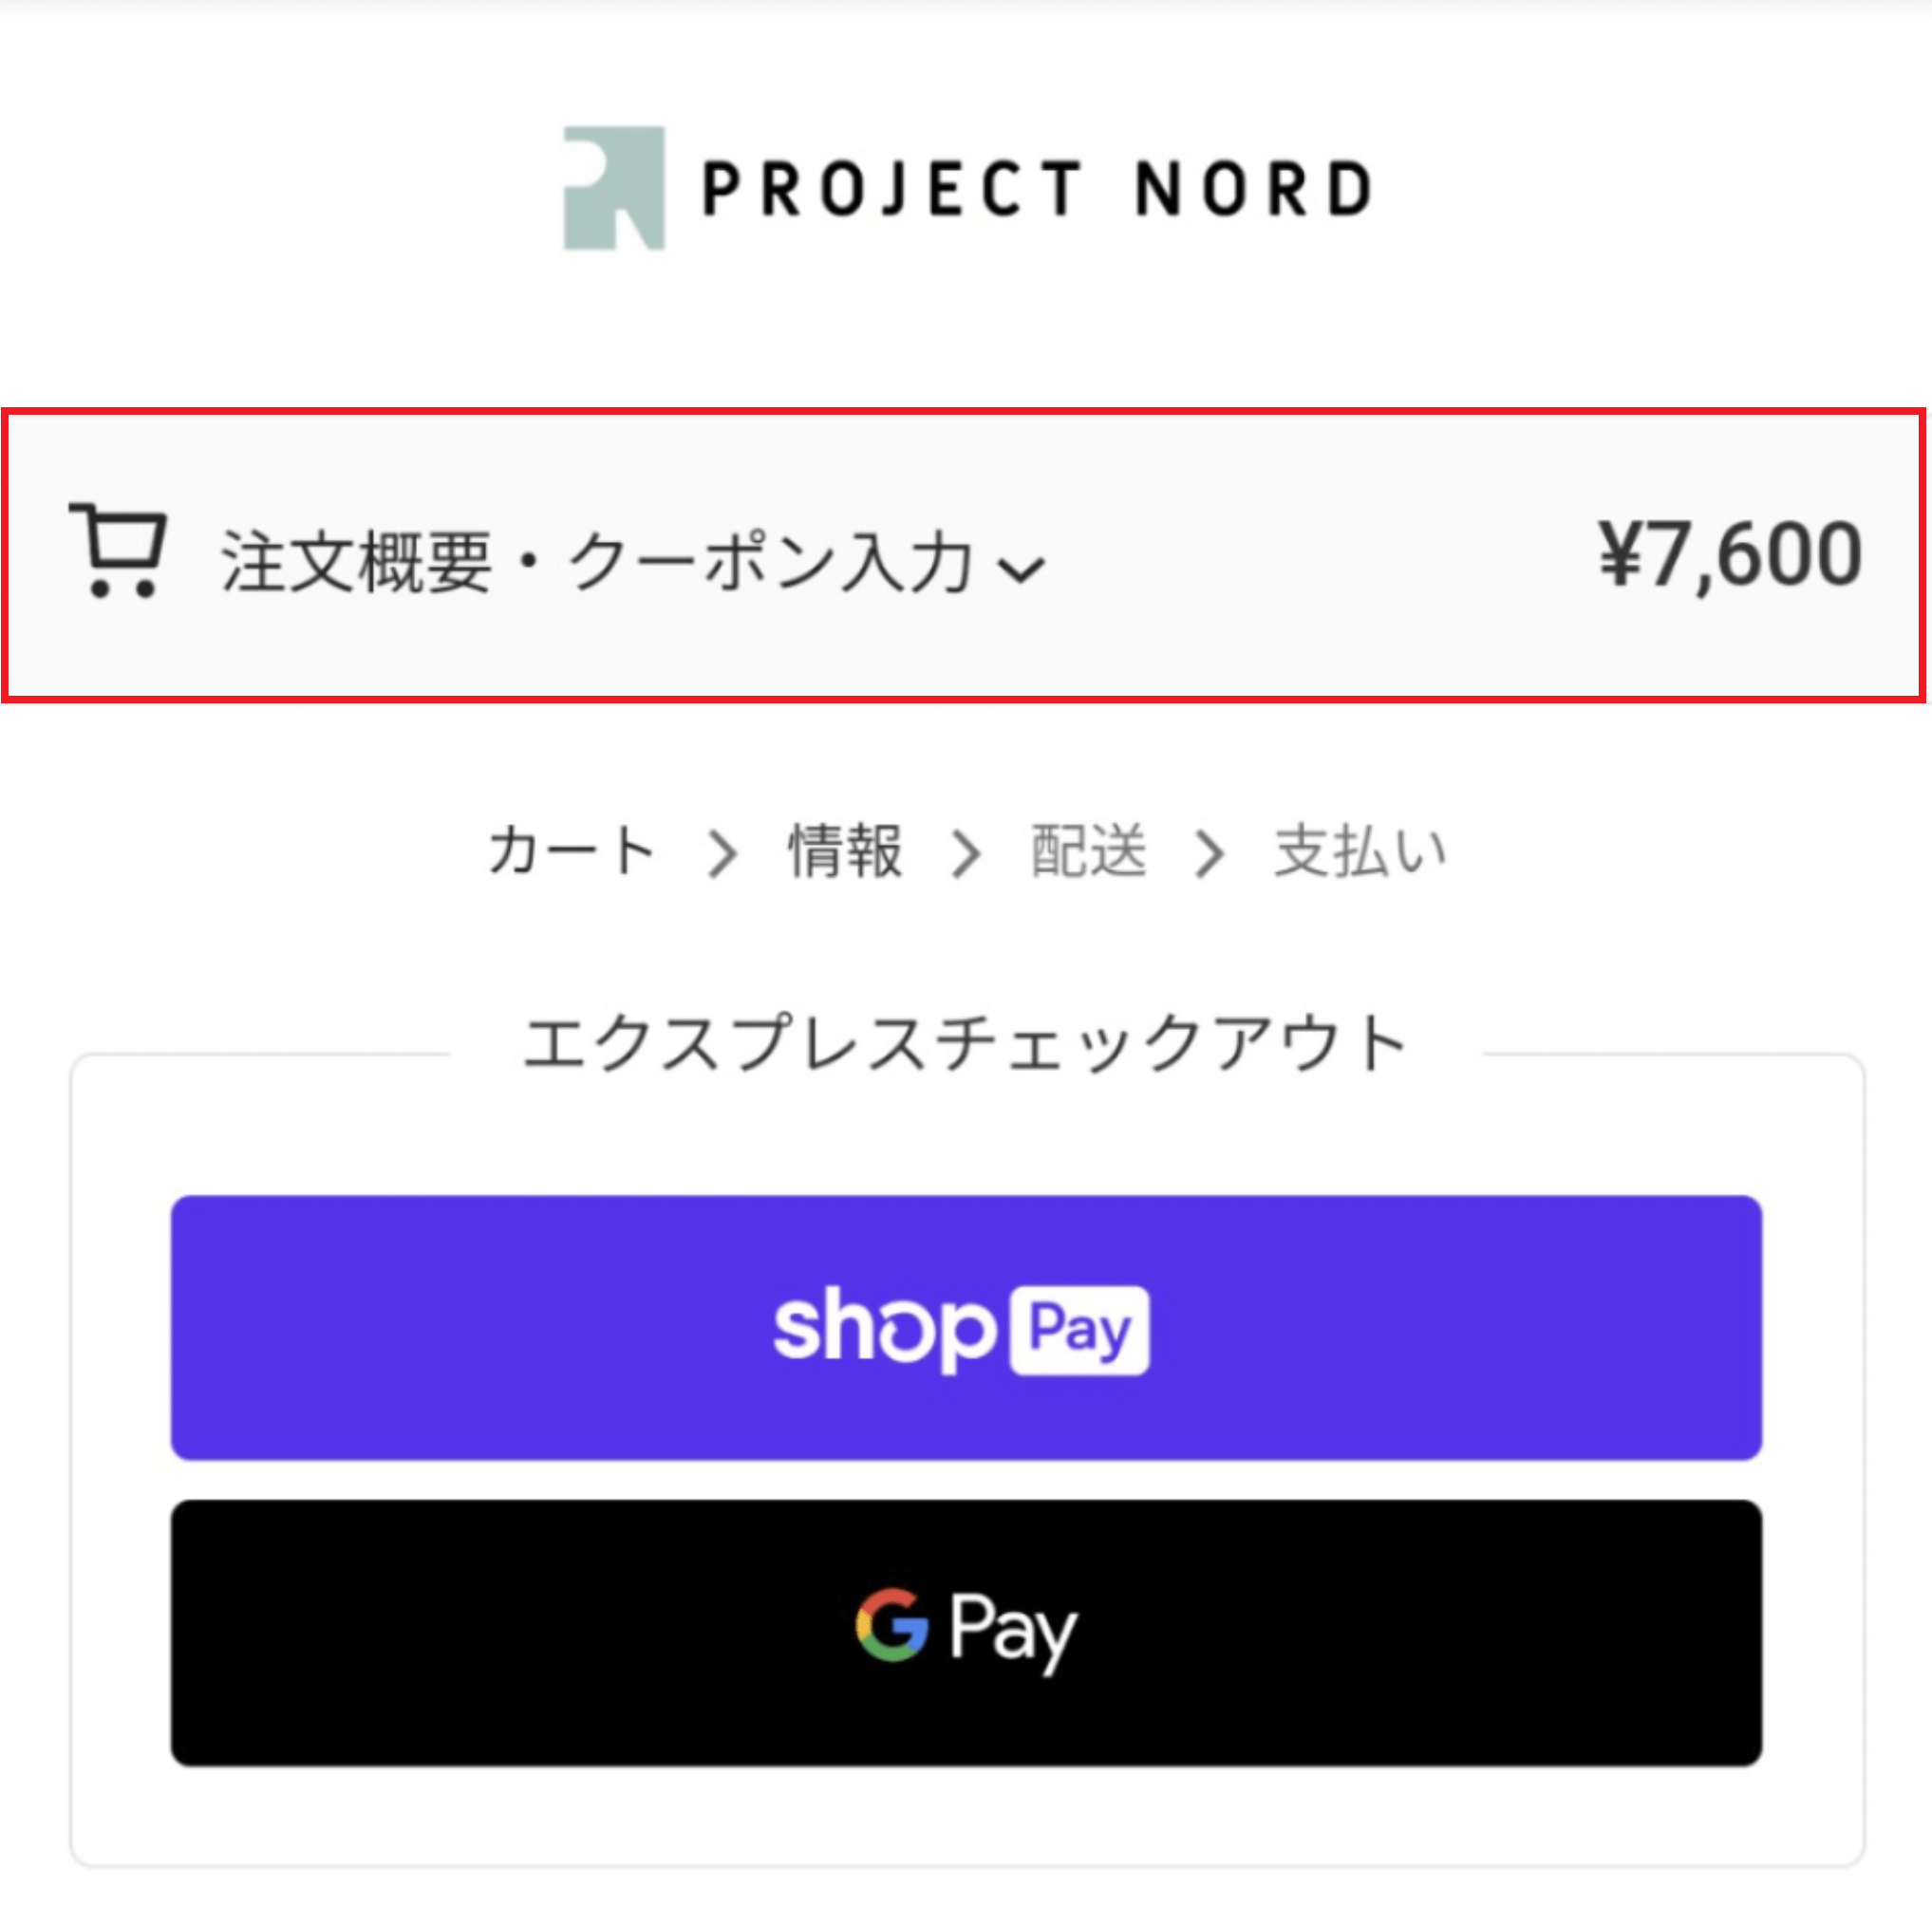 Project Nordでクーポンを使う